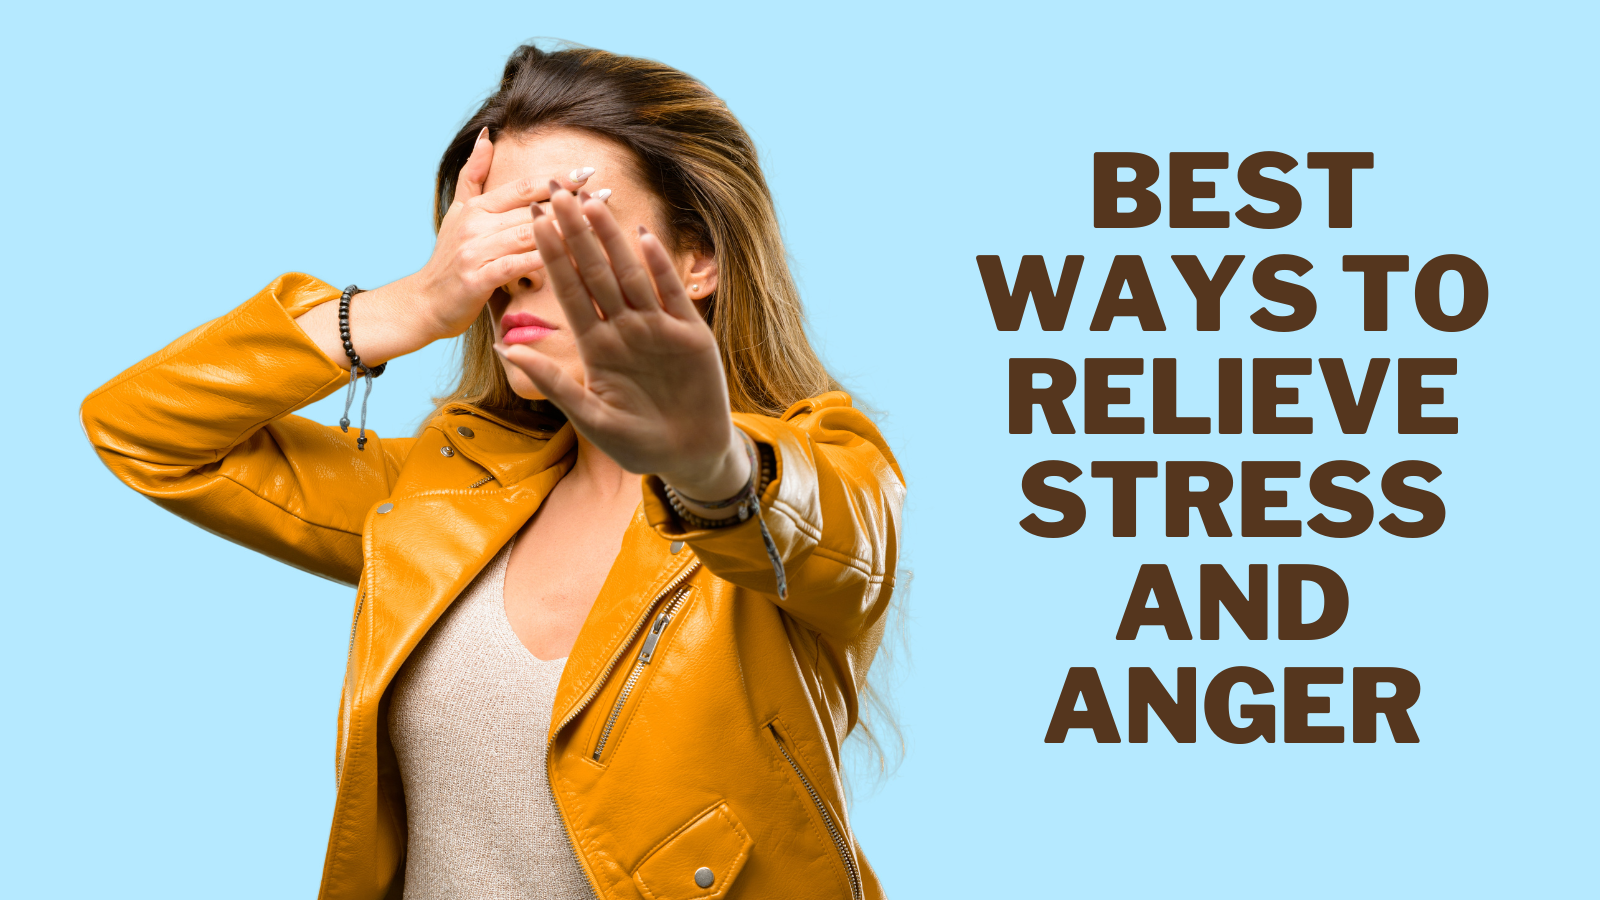 Best Ways To Relieve Stress And Anger